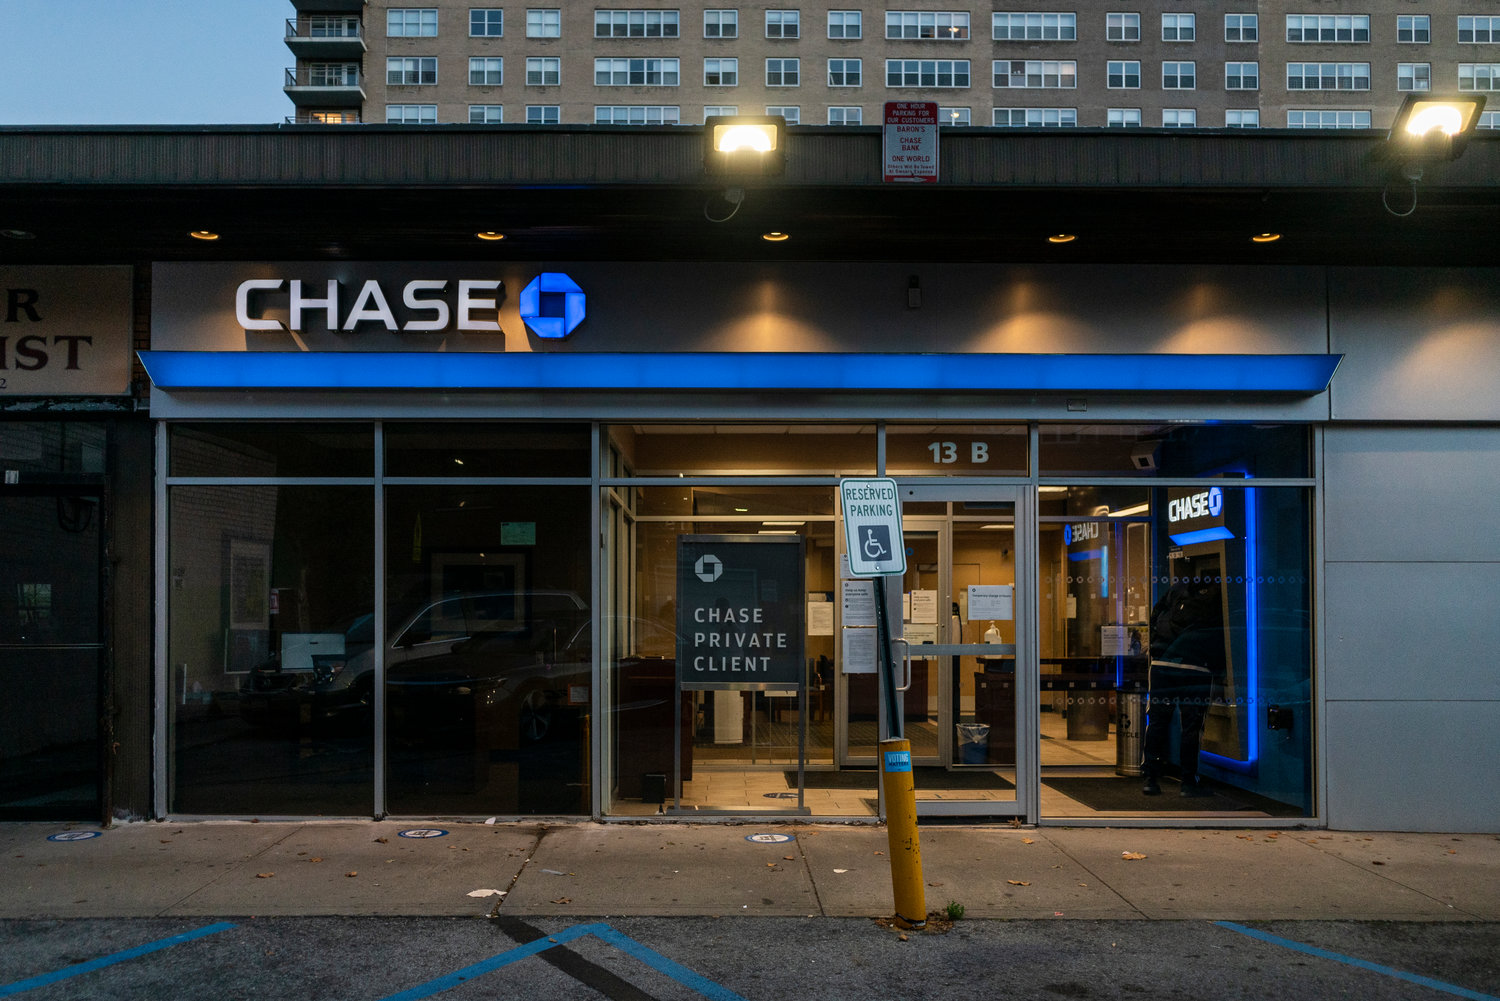 The impending closure of Chase Bank on Knolls Crescent has prompted rallies, community board resolutions, and many social media posts — all imploring JPMorgan Chase to keep the branch open.